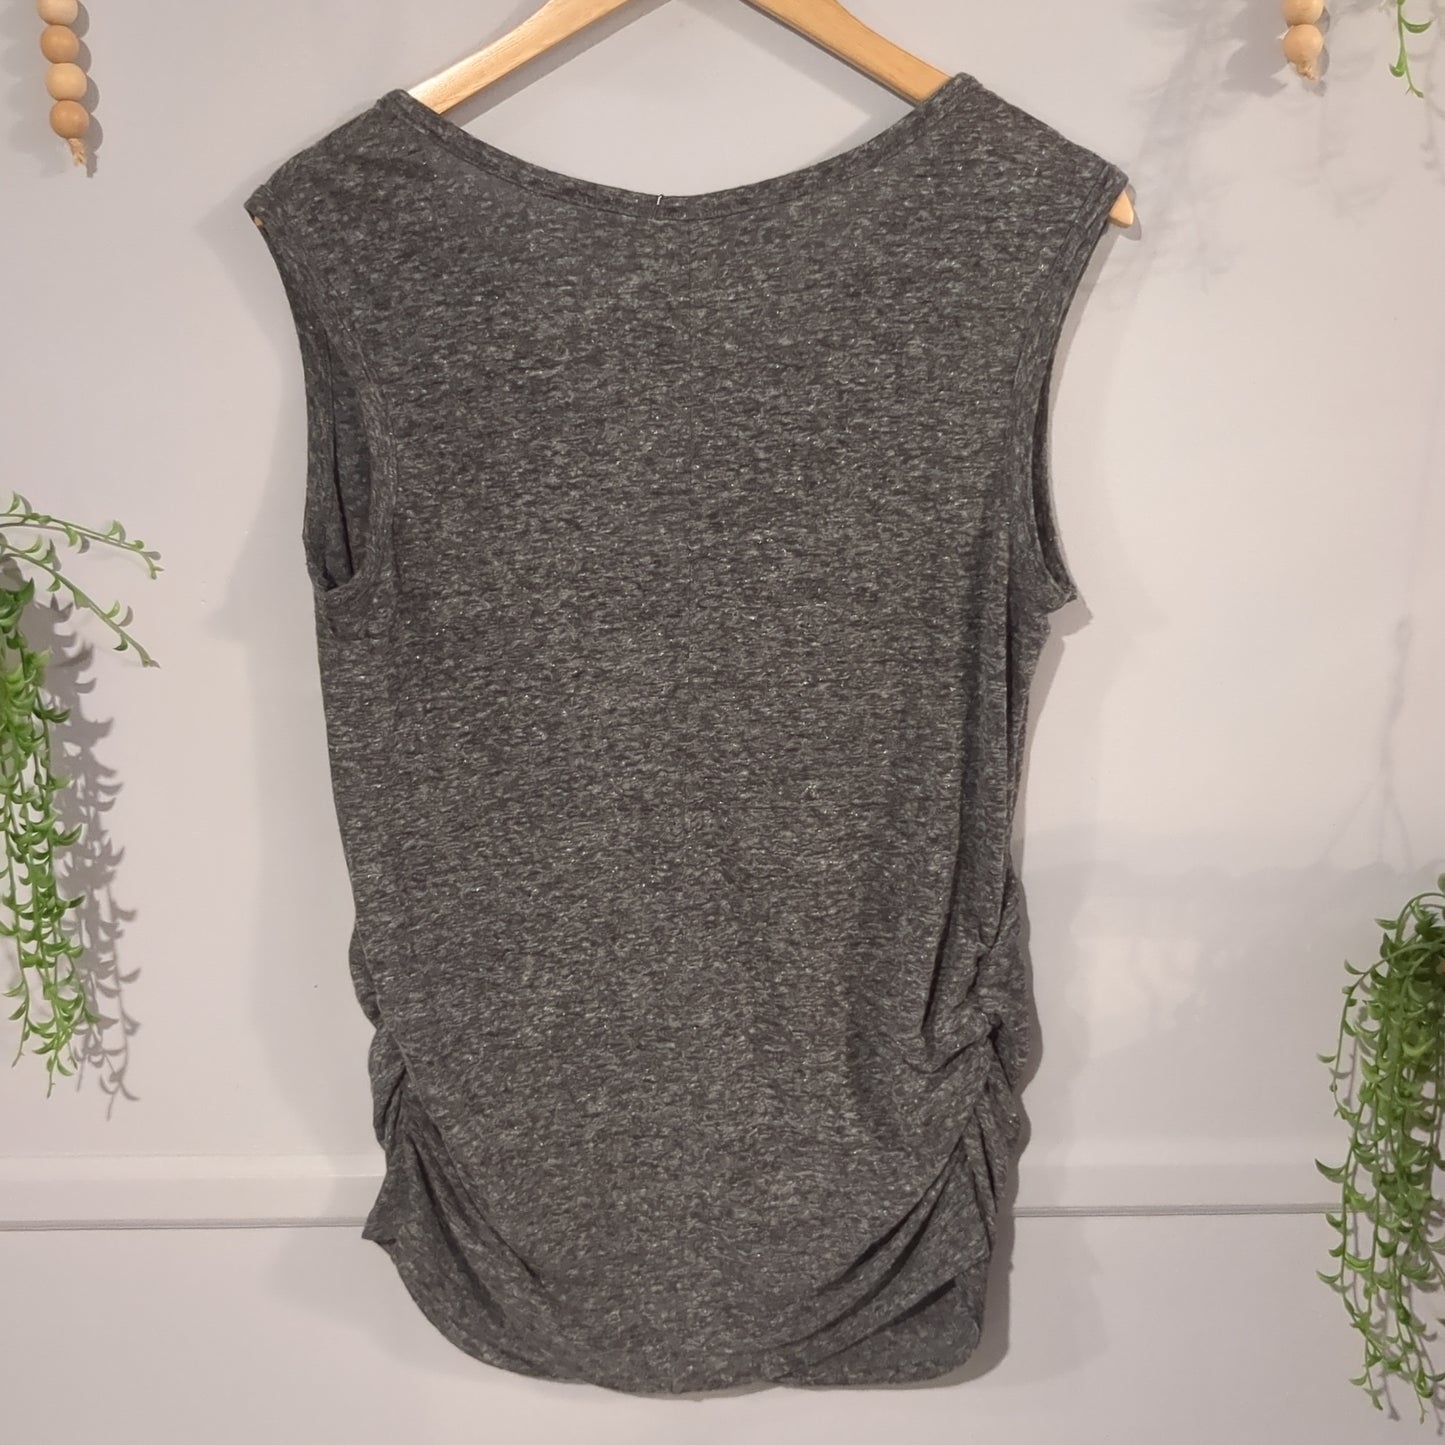 Relaxed fit scoop neck tank, Heathered charcoal